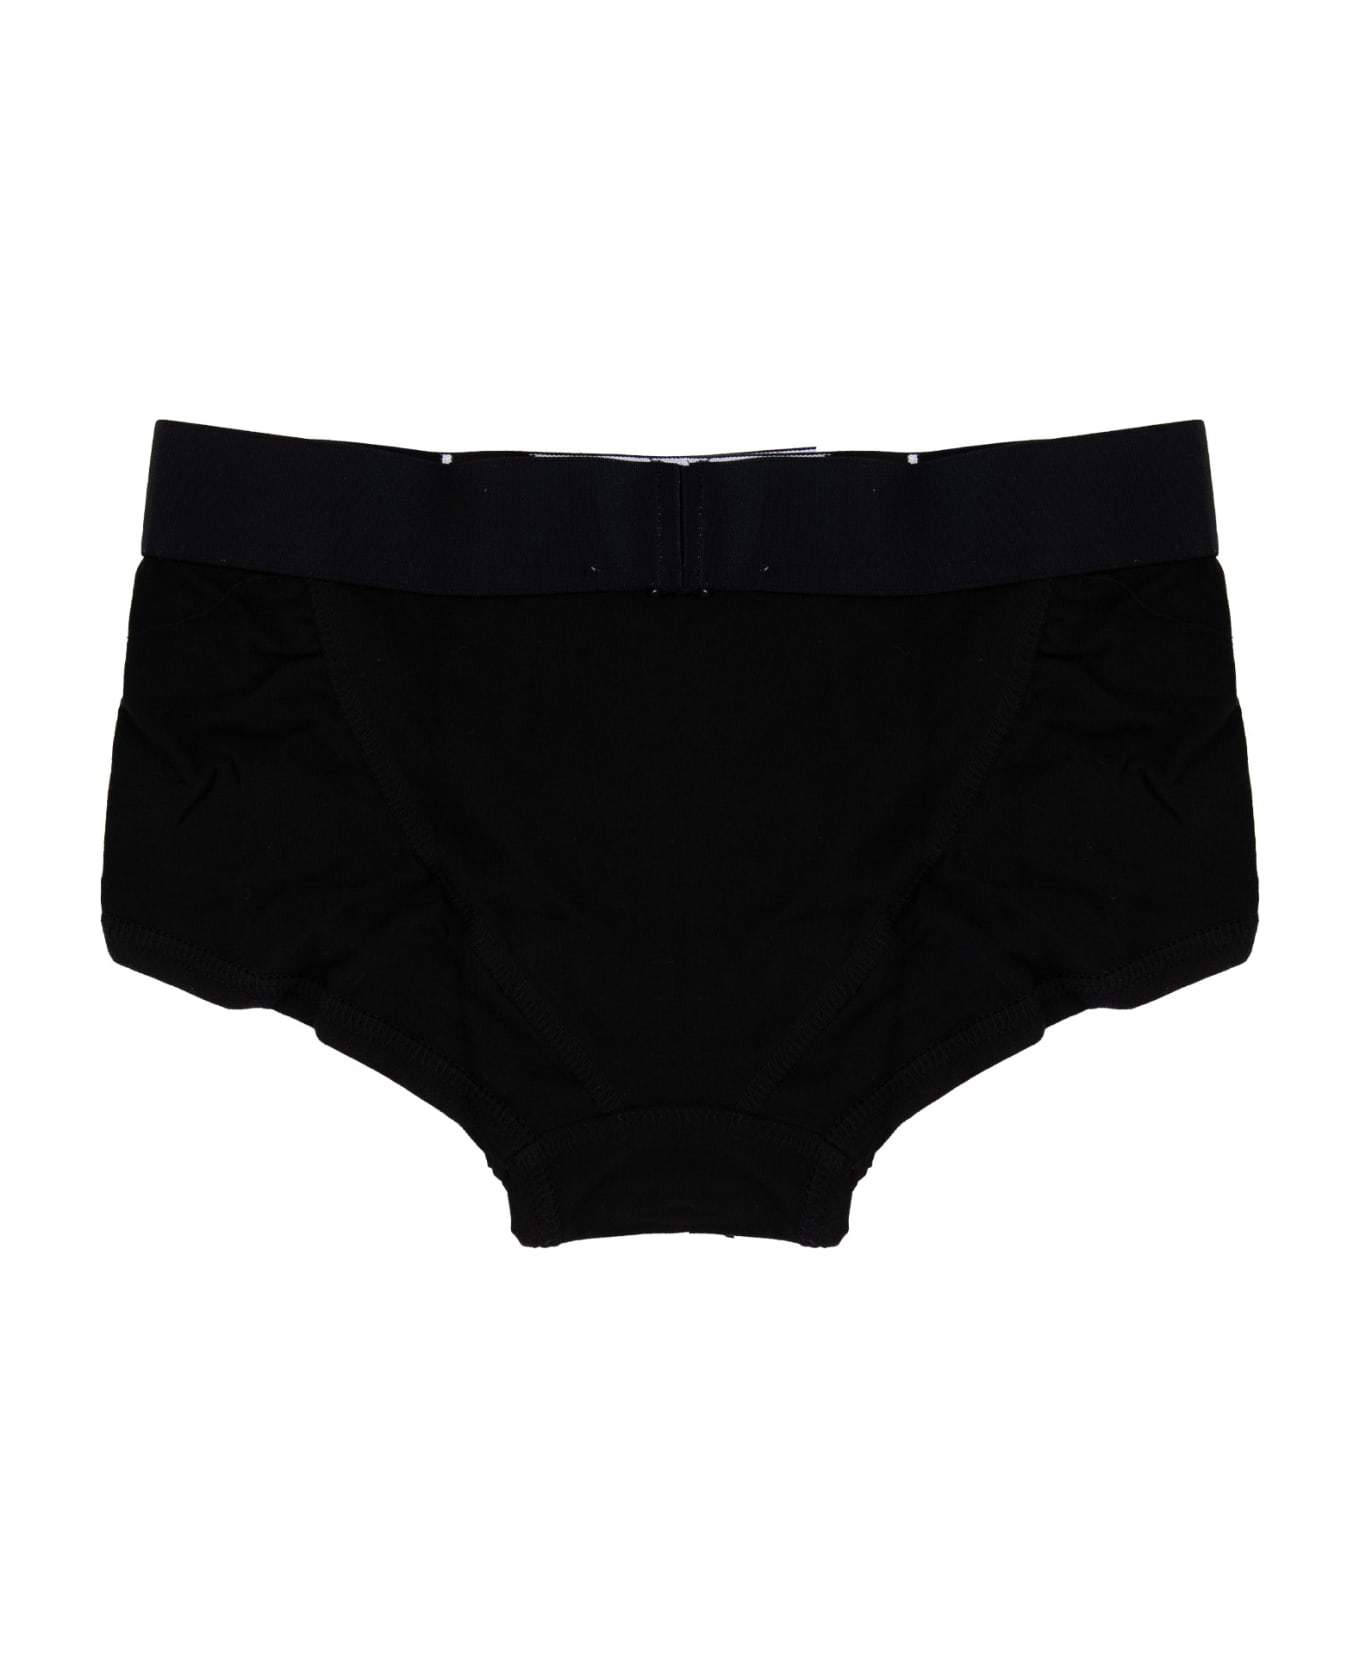 Dsquared2 Jersey Boxer With Logoed Elastic - Back アンダーウェア